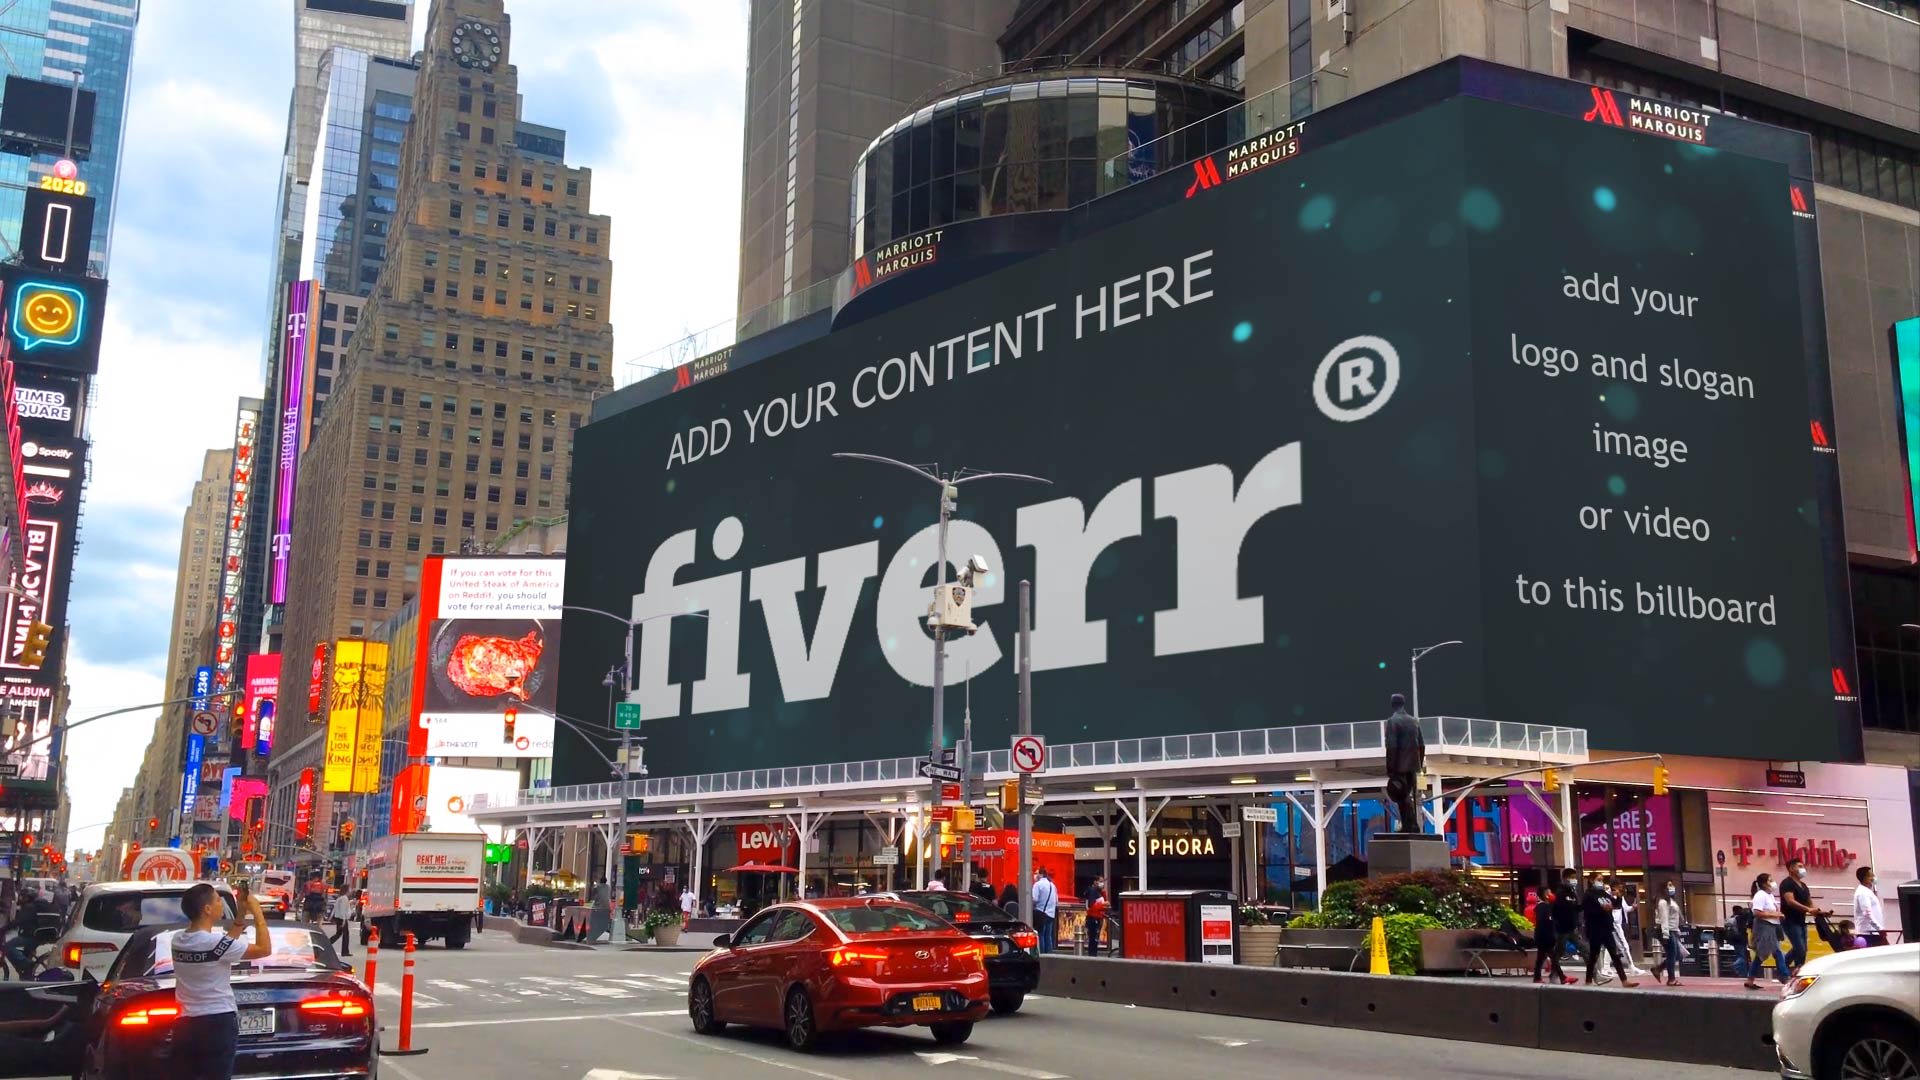 Download Add Your Content On This Times Square Billboard New York In This Video By Antonio26900 Fiverr